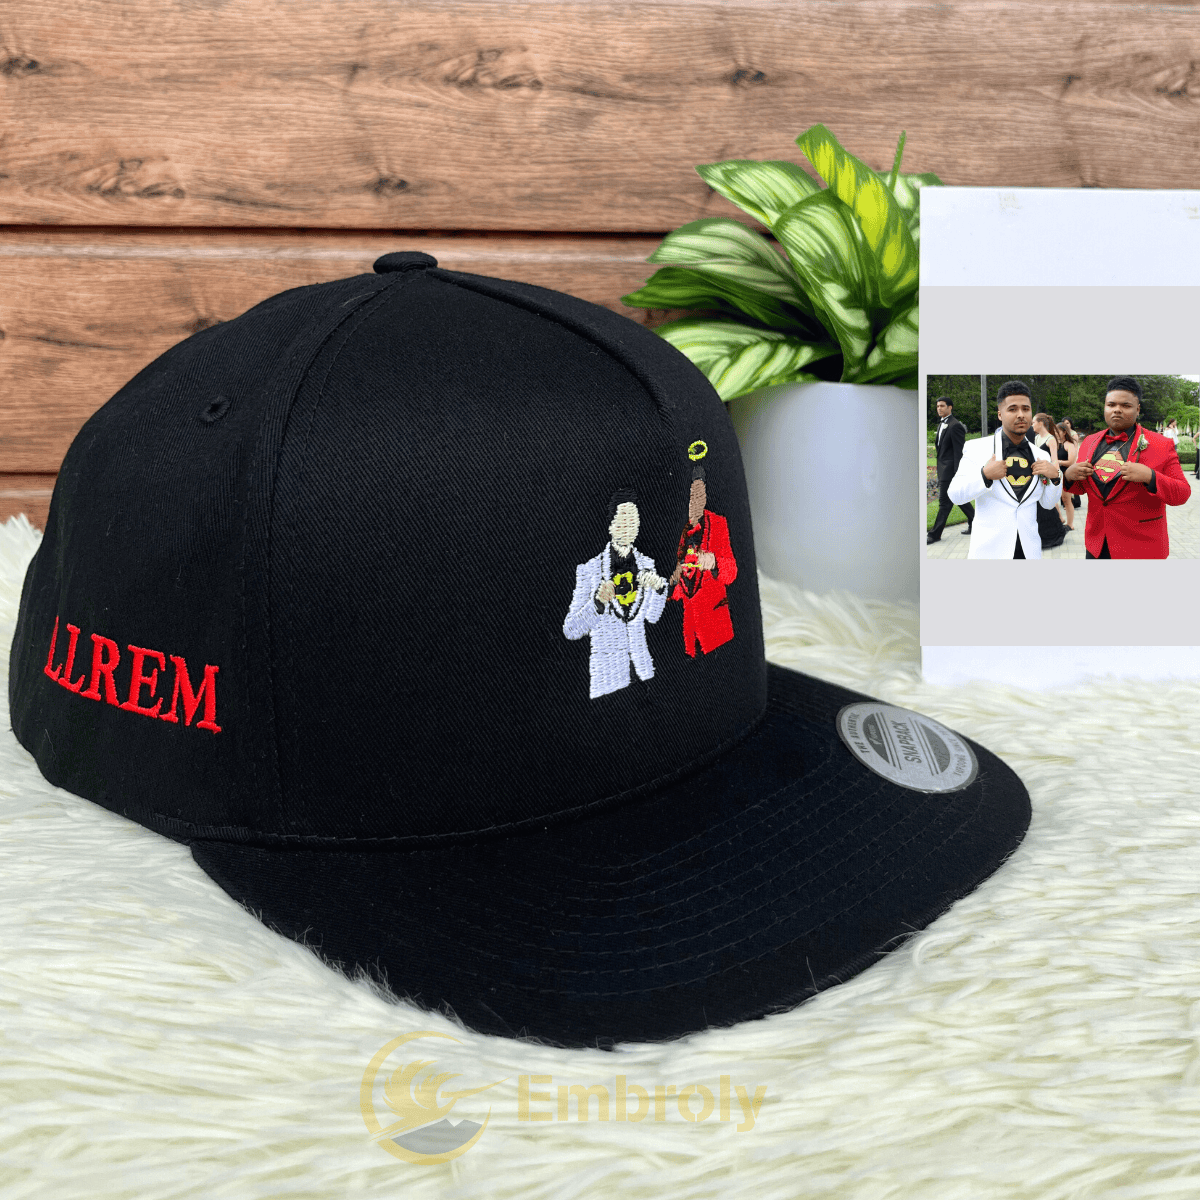 Personalized Hat with Photo Embroidery Design, Anniversary Gift for Friend Couple, Customize Snapback Hat with Date On Side Navy/Red